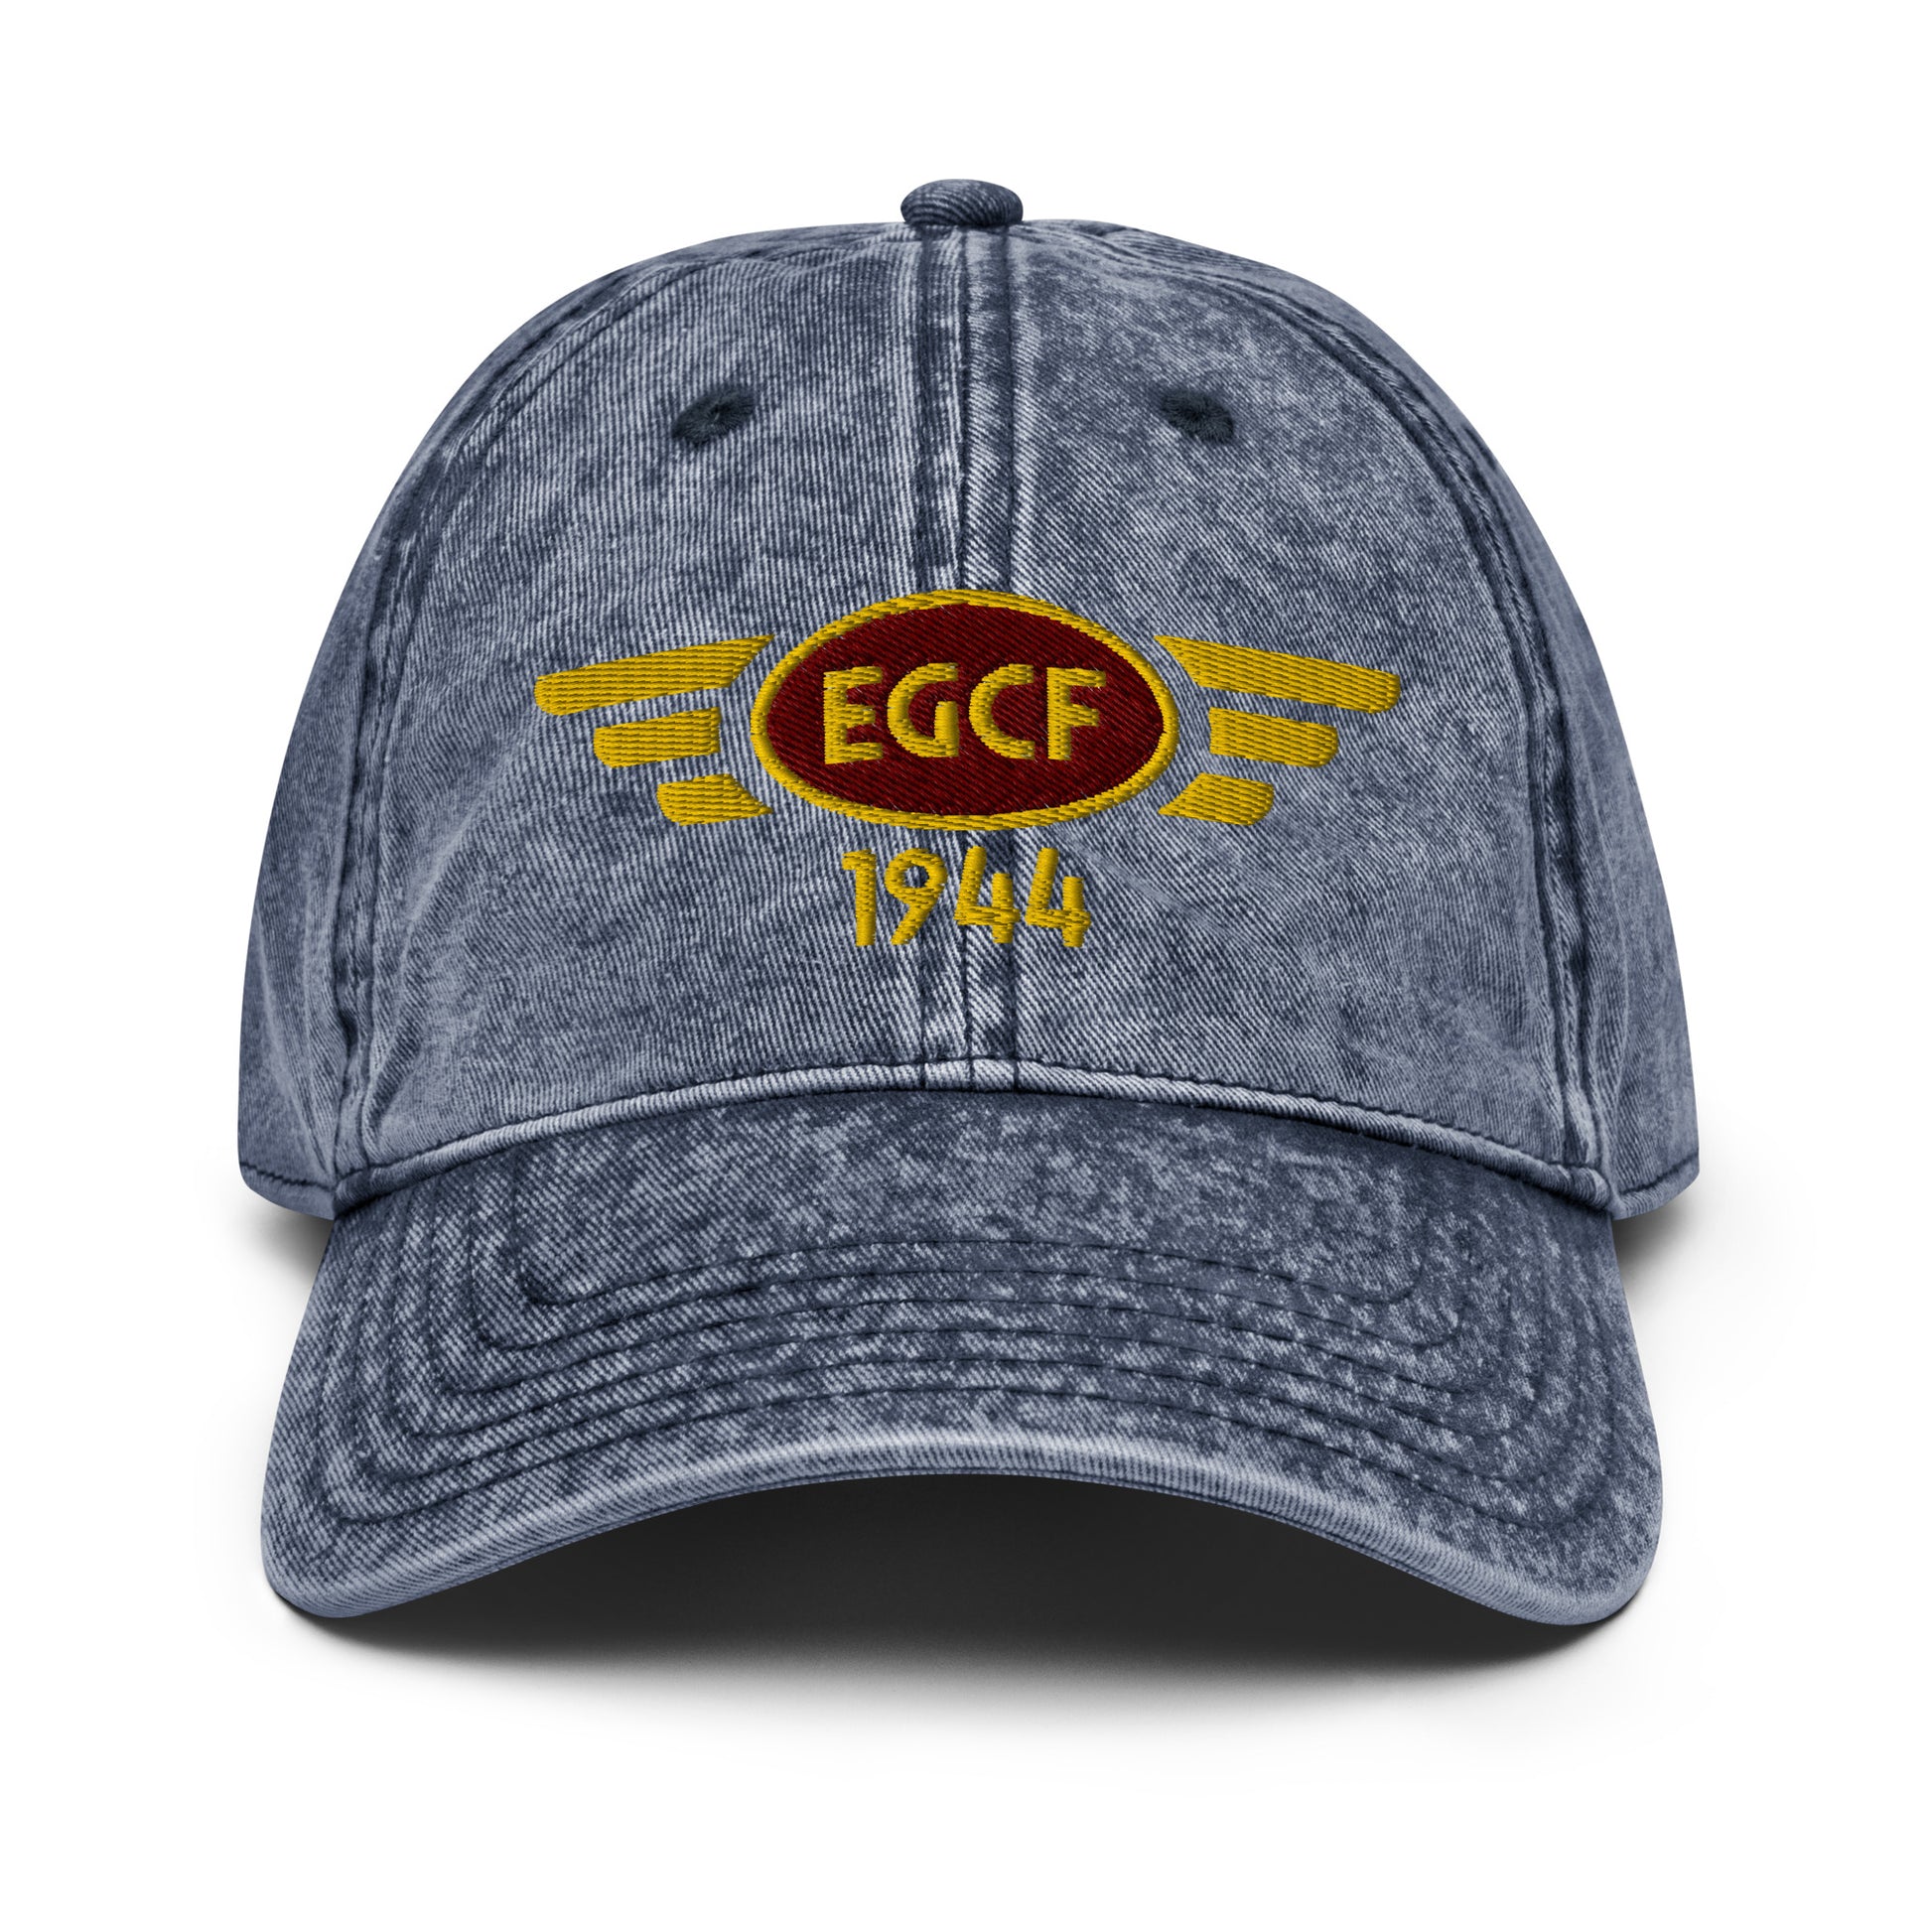 Blue cotton twill baseball cap with embroidered vintage style aviation logo for Sandtoft Airfield.